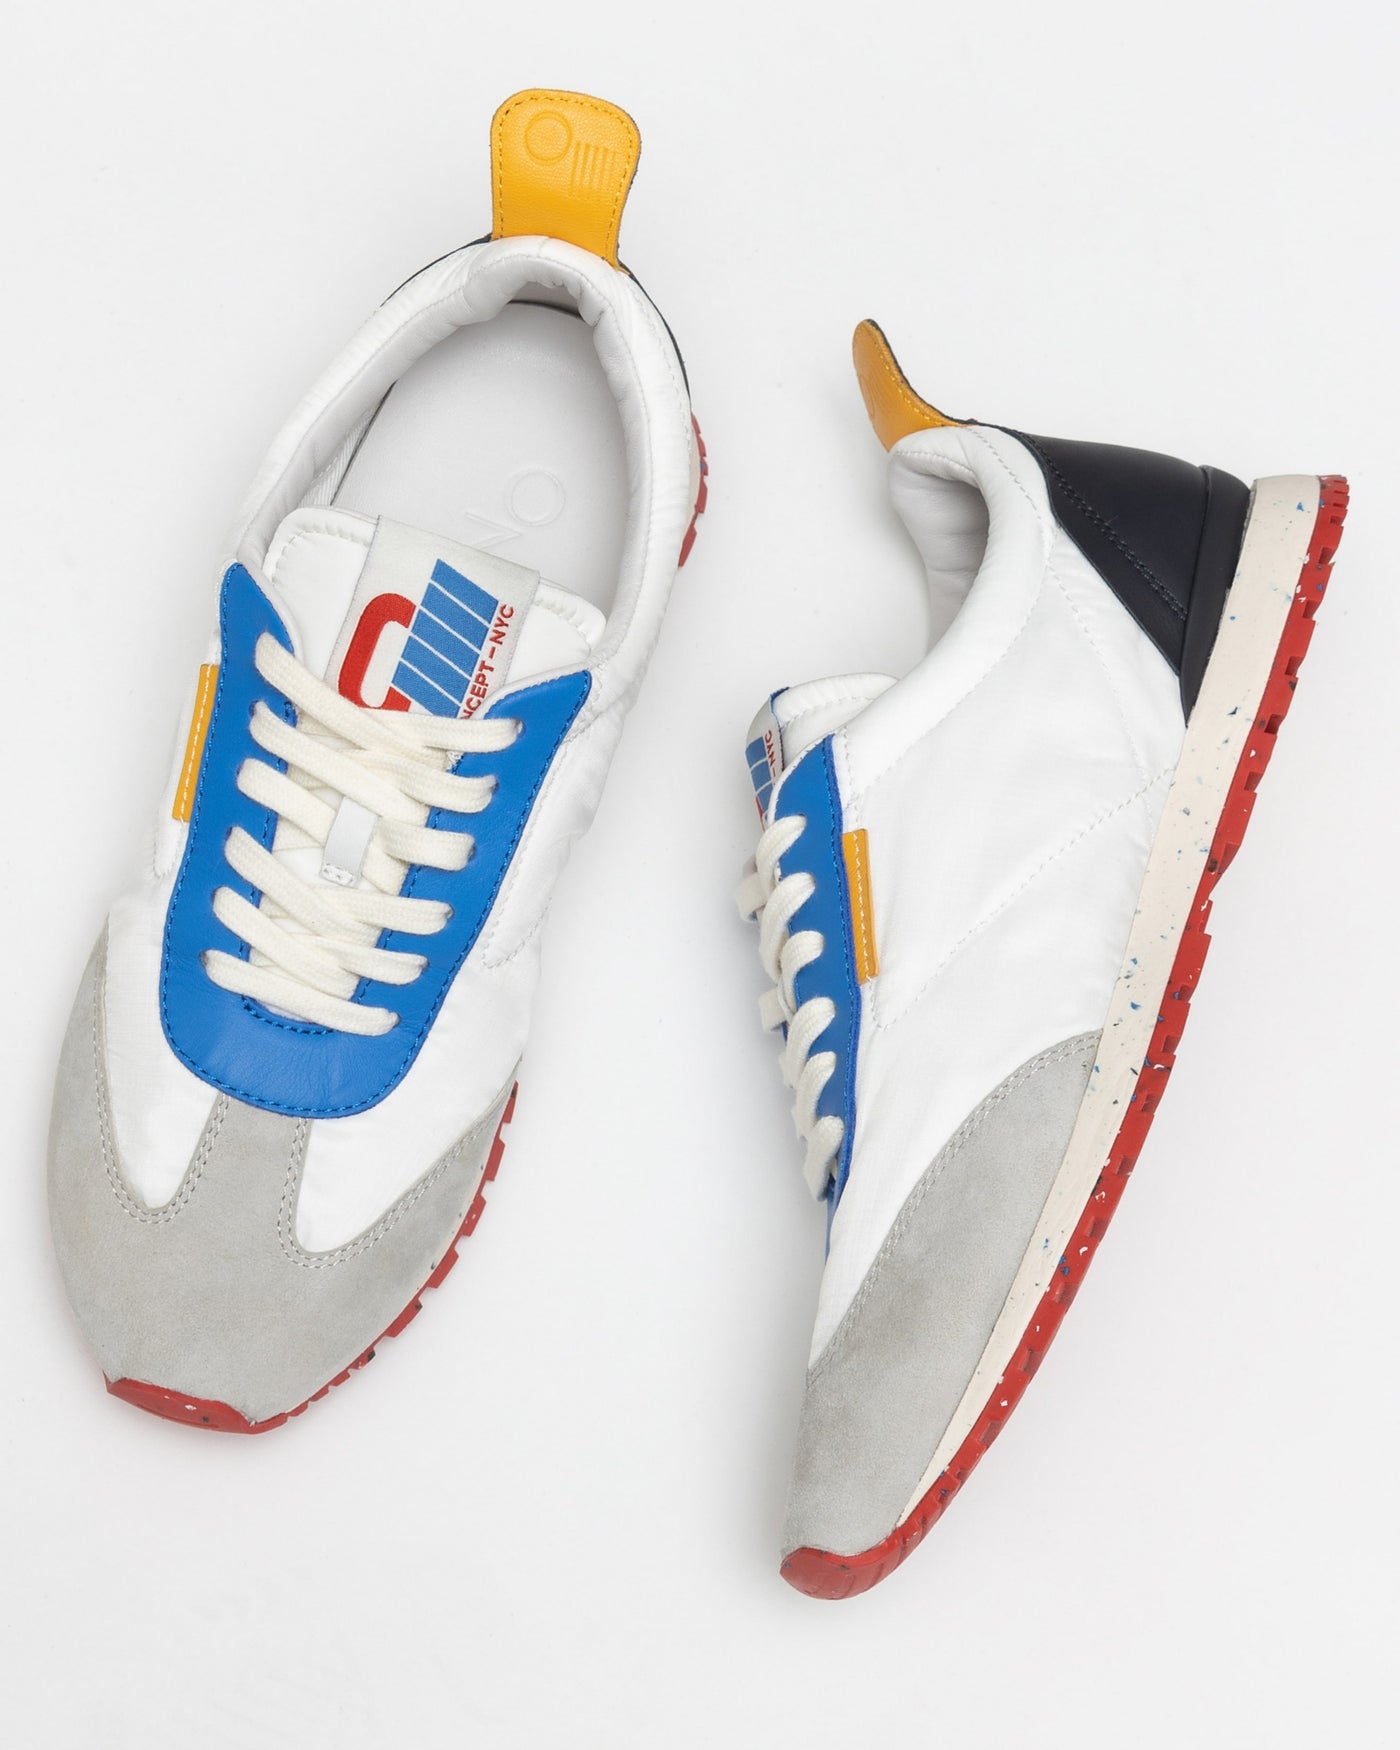 Tokyo Heritage Blue Sneaker by Oncept